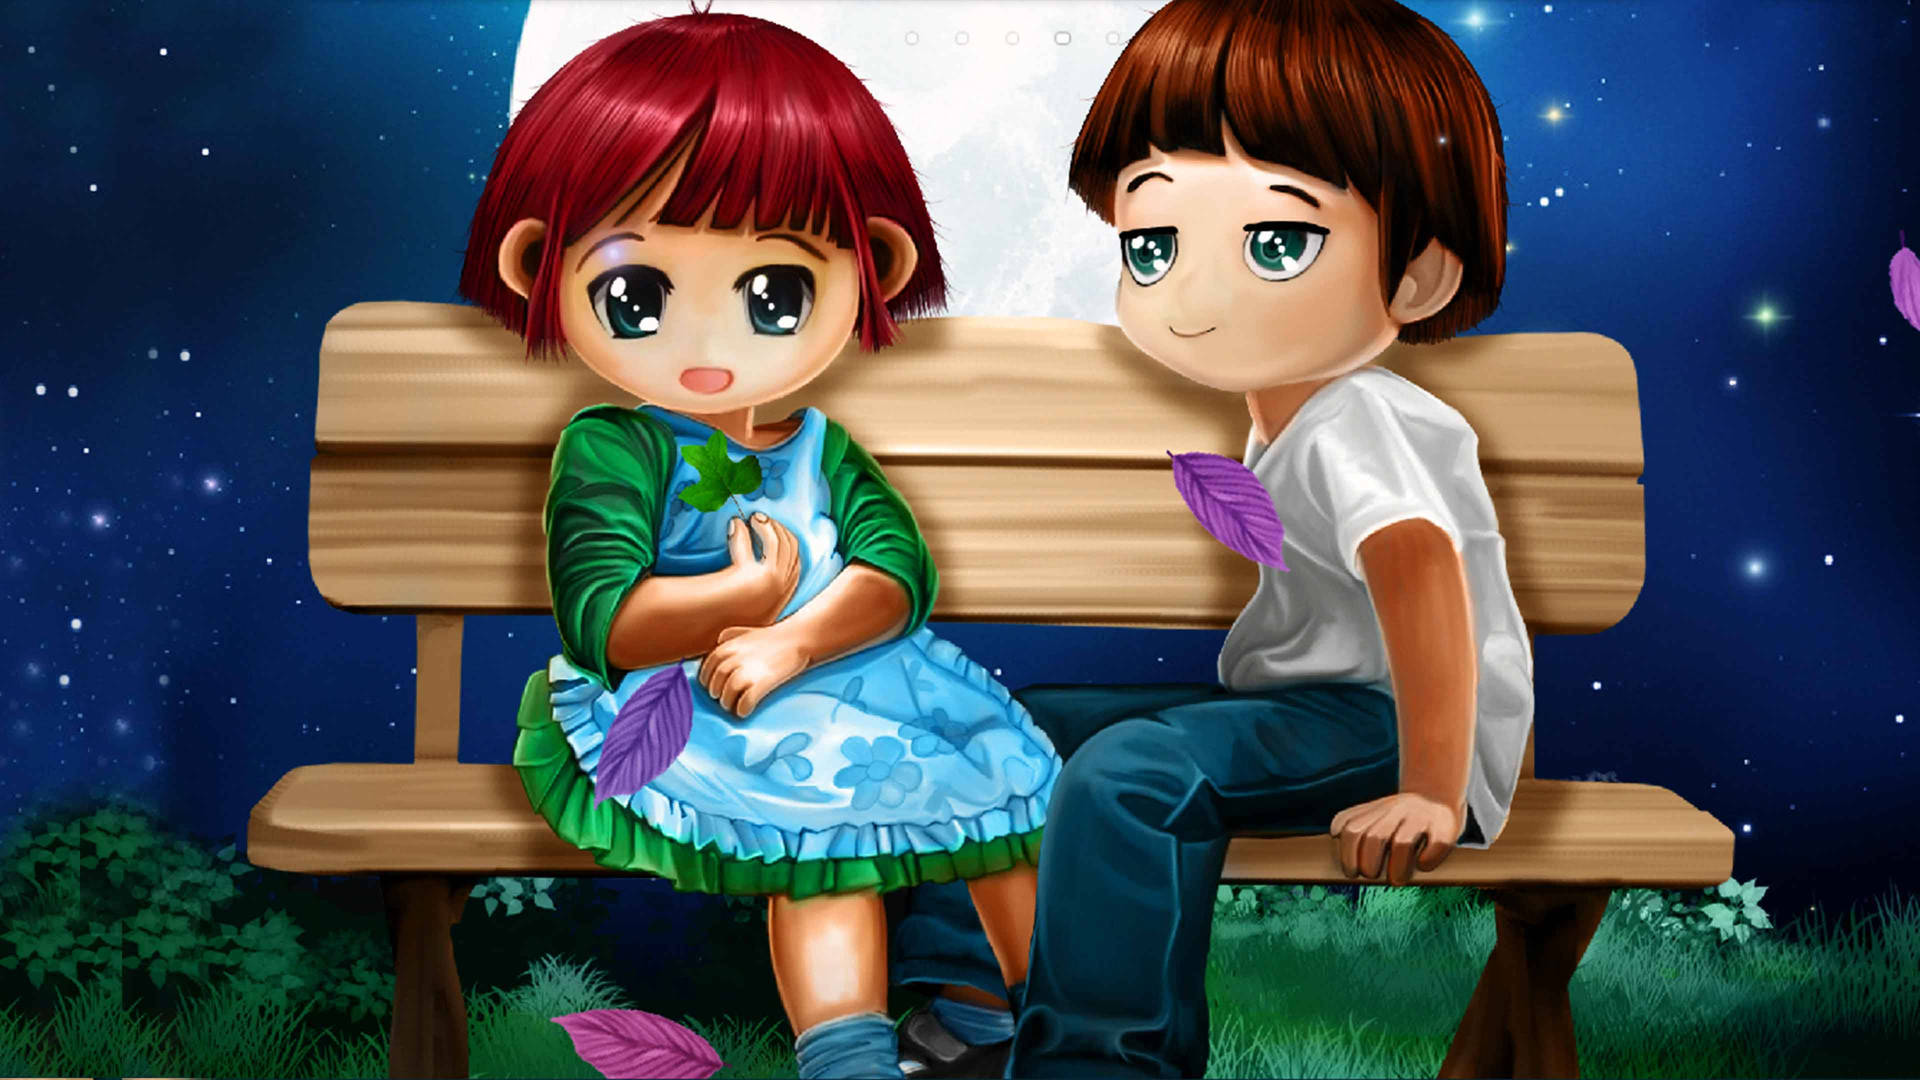 Love Cartoon Bench Couple Picture